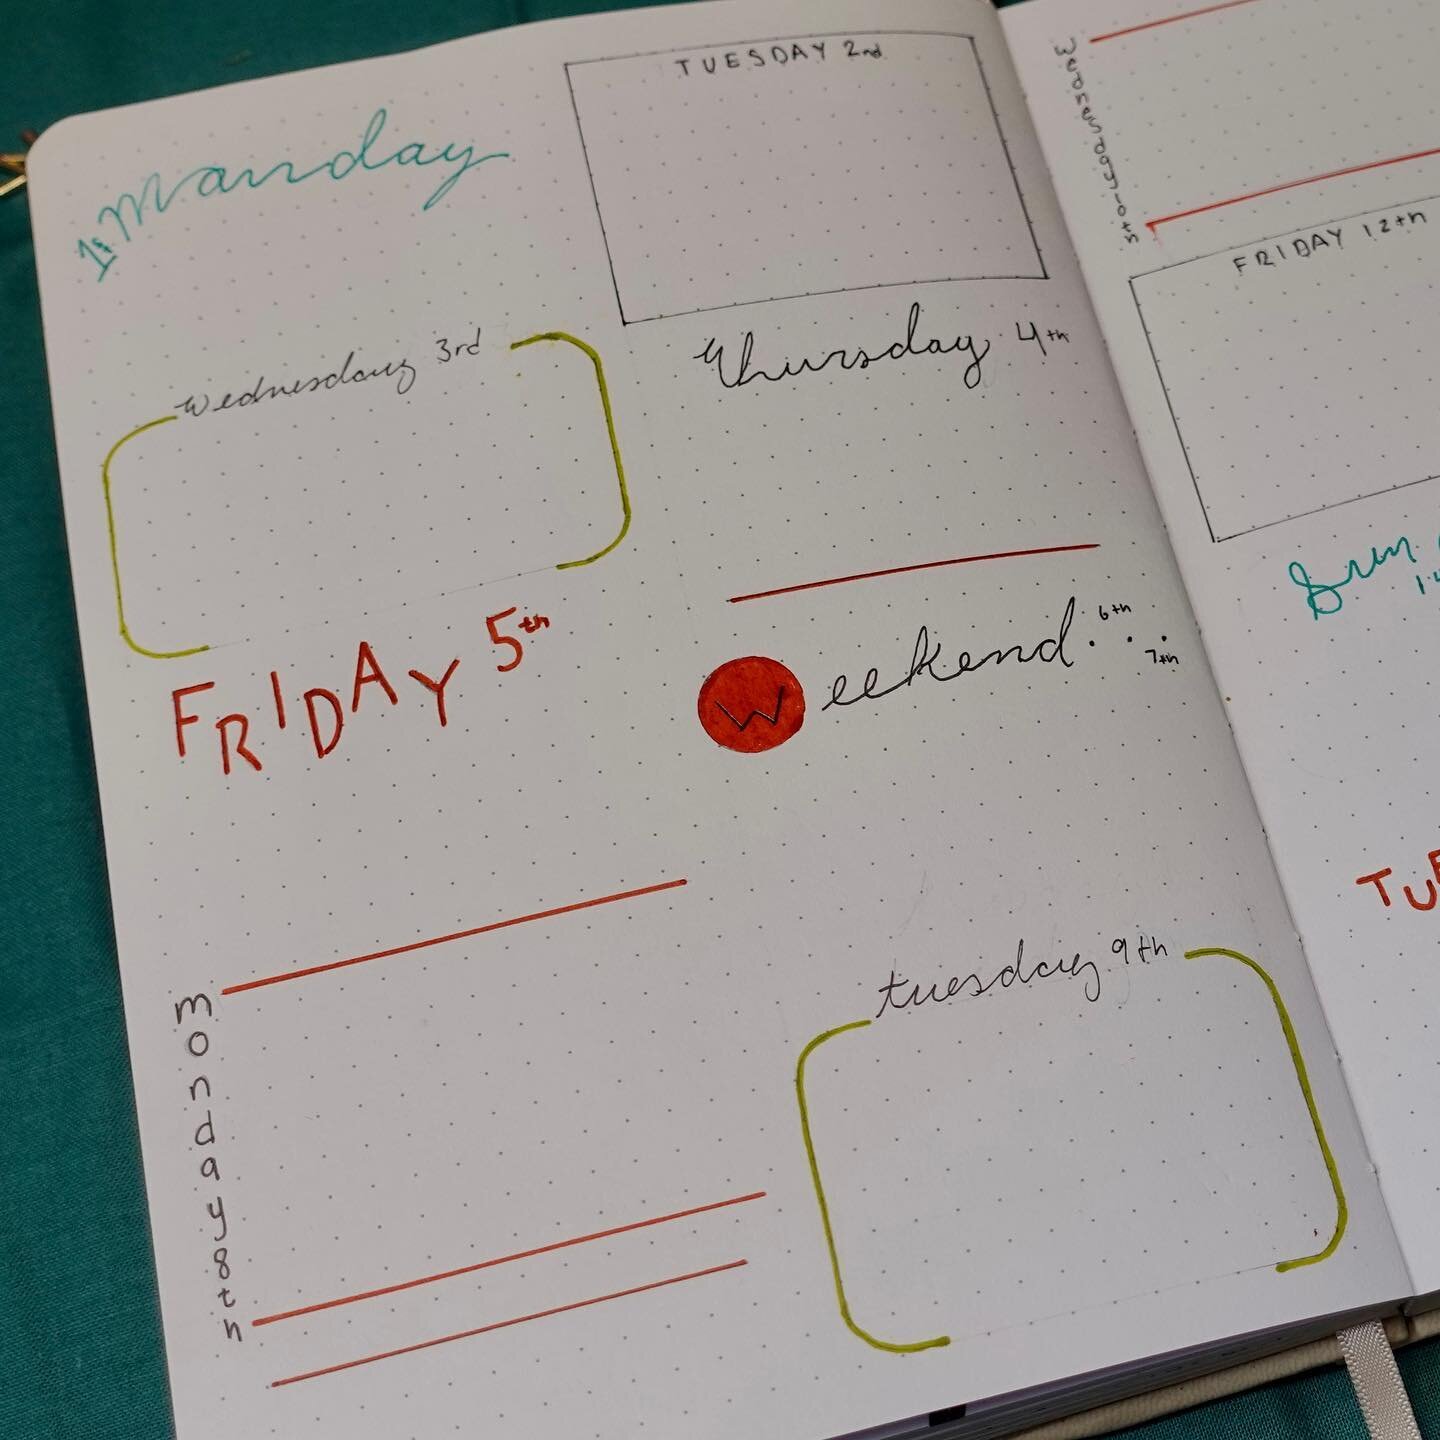 I wanted to explore using different shapes and styles for the dailies and coming up with the rules and colors for each other was so fun

.
.
.
. 
[#bujo #bulletjournalstickers #bujocommunity #bujoideas #bujolayout #bujoinspo #stickers #stickersheets 